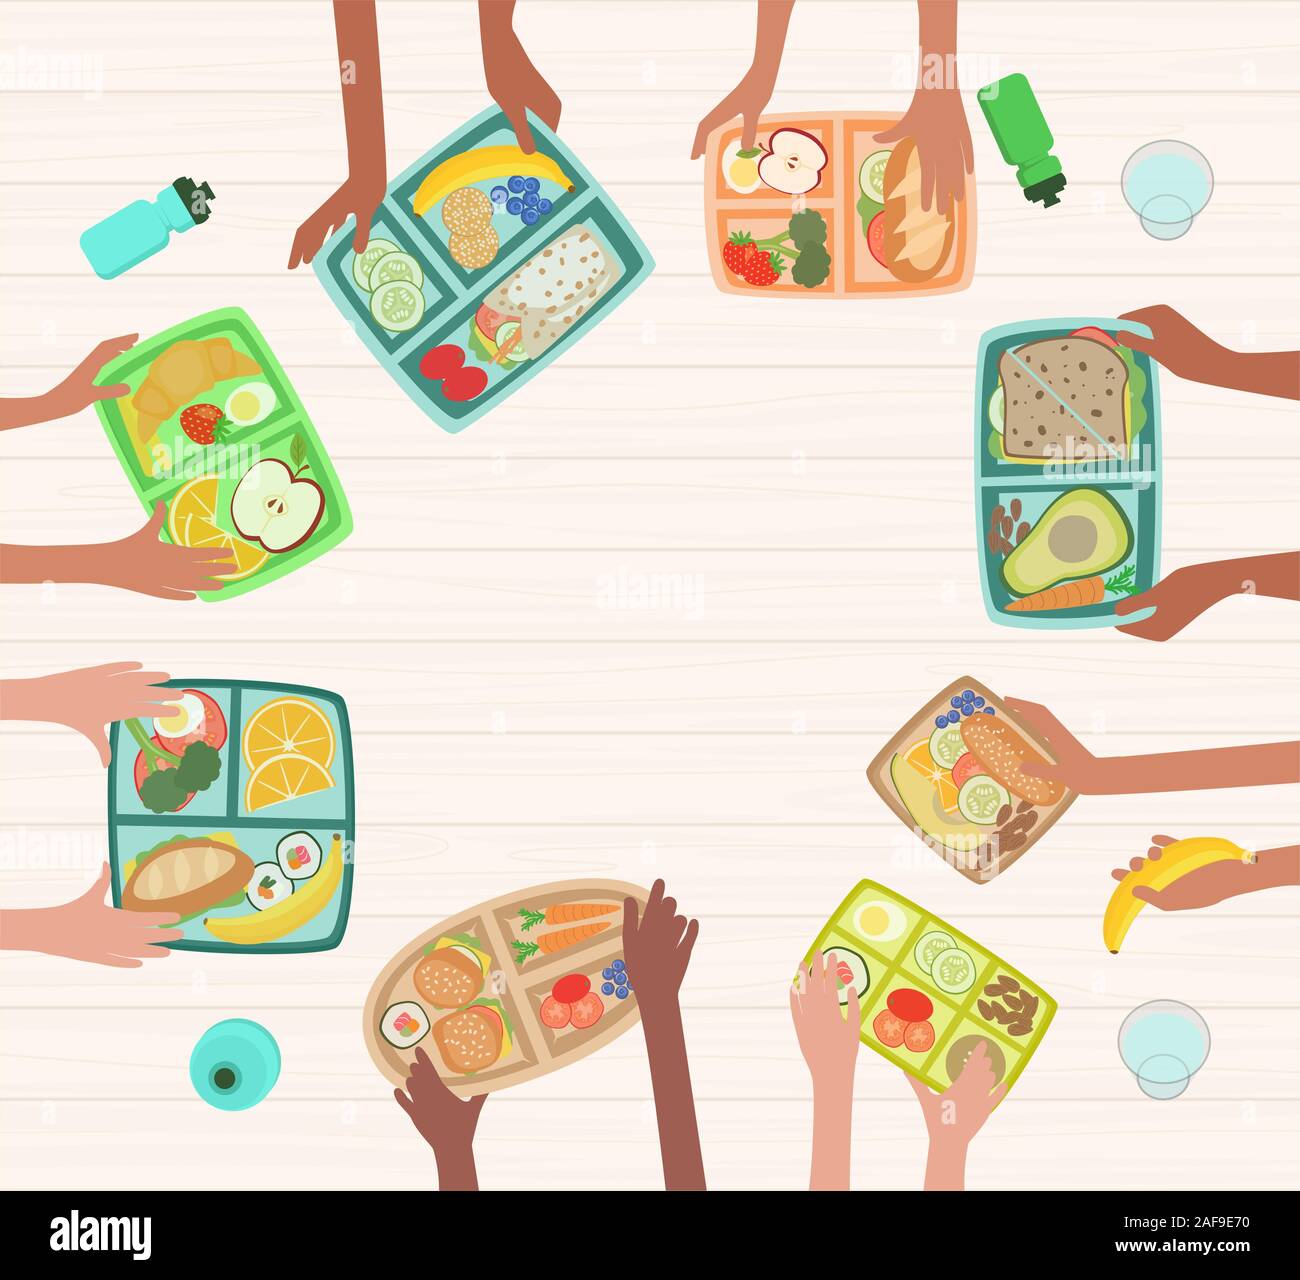 Children hands holding lunch boxes on table with healthy lunches food nutrition in school concept with lunchboxes Stock Vector